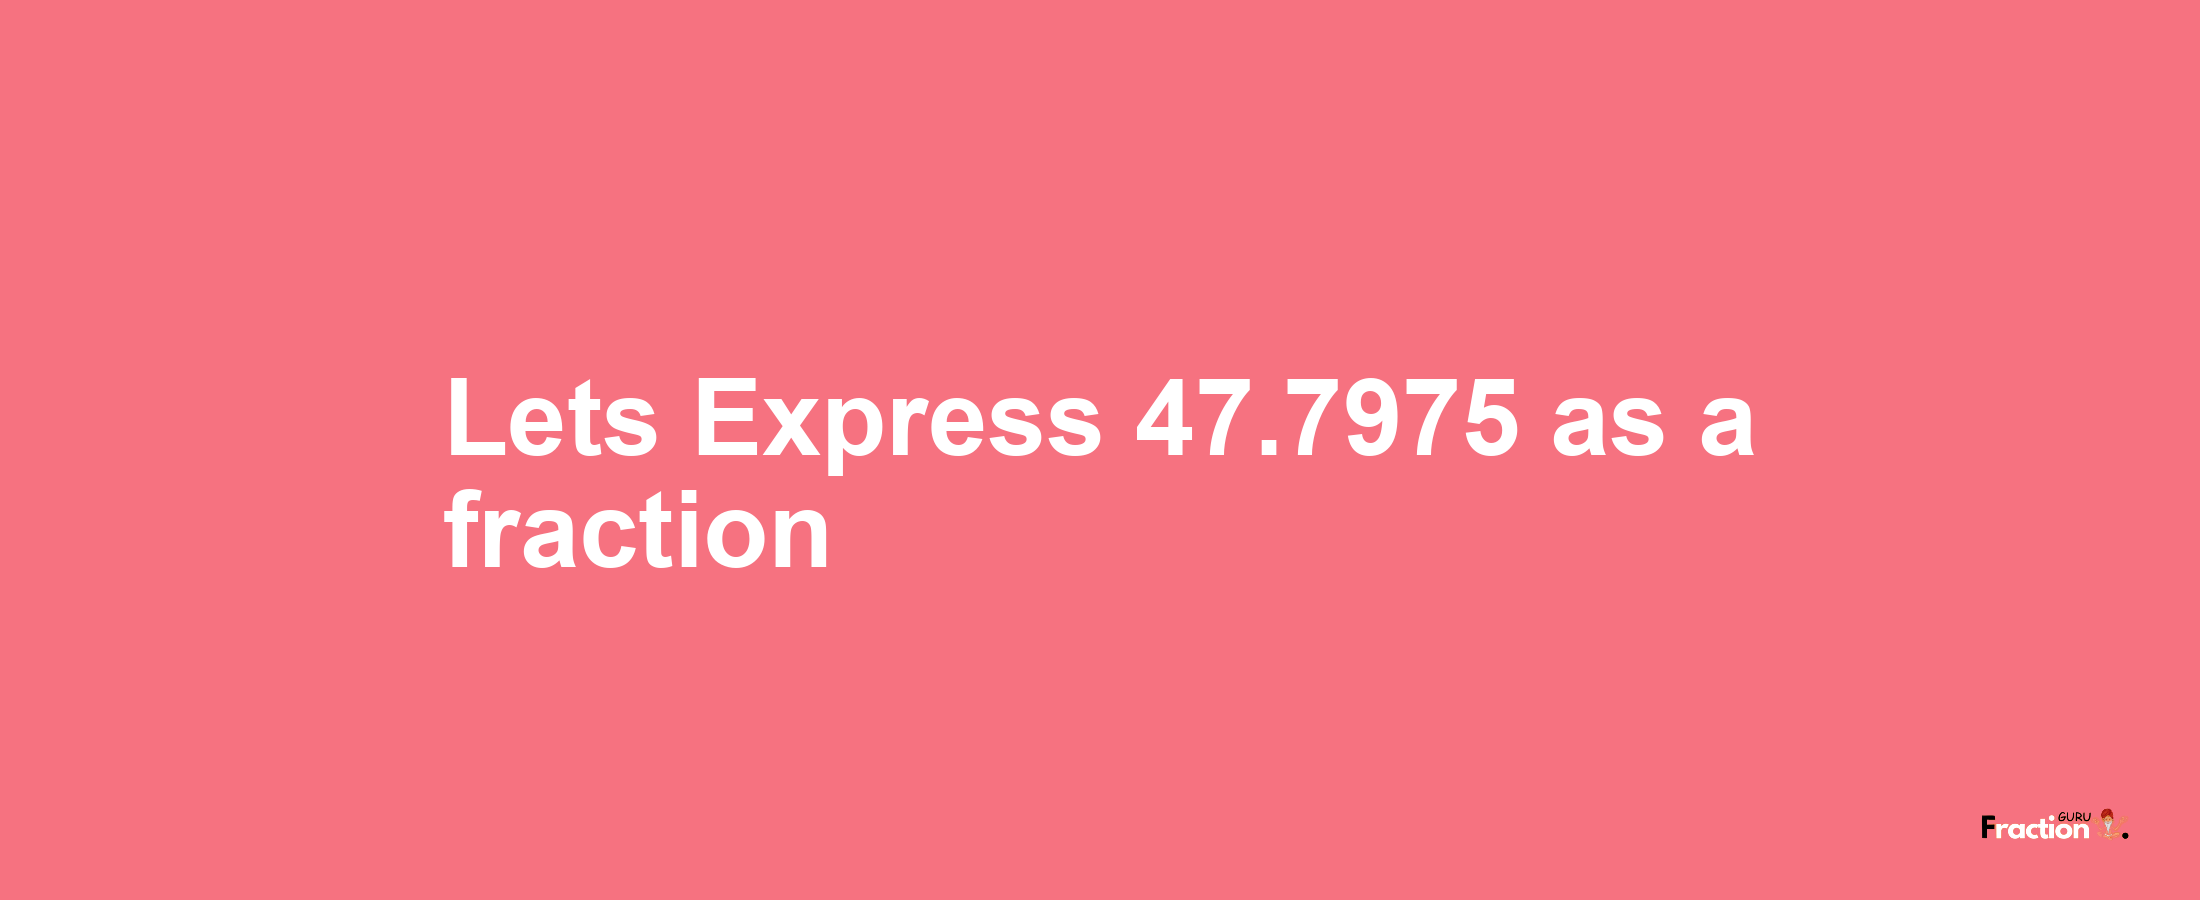 Lets Express 47.7975 as afraction